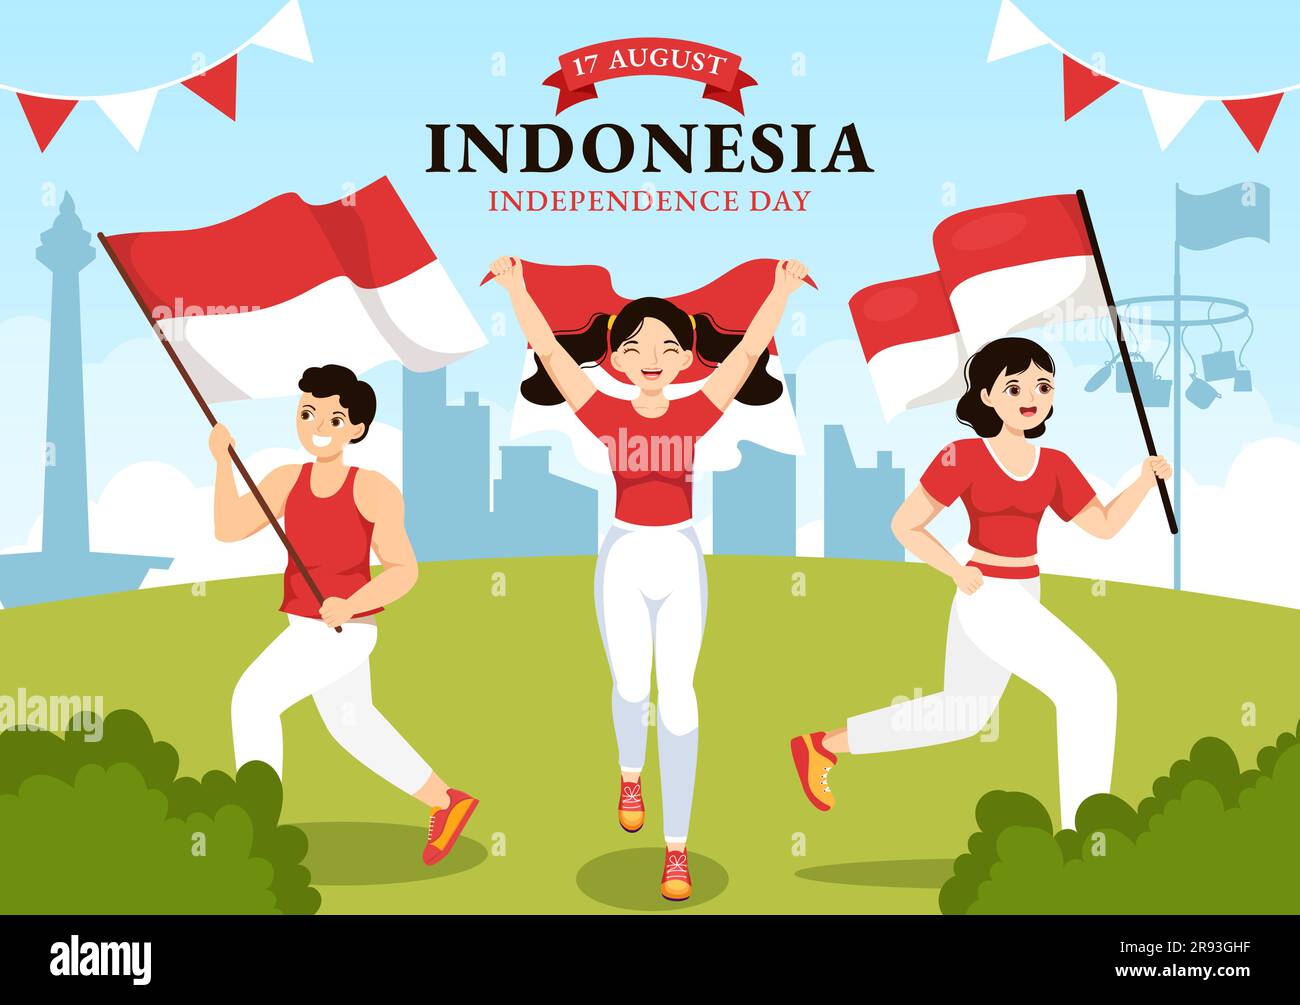 Indonesia Independence Day Vector Illustration On 17 August With Indonesian Flag Raising The Red 2185